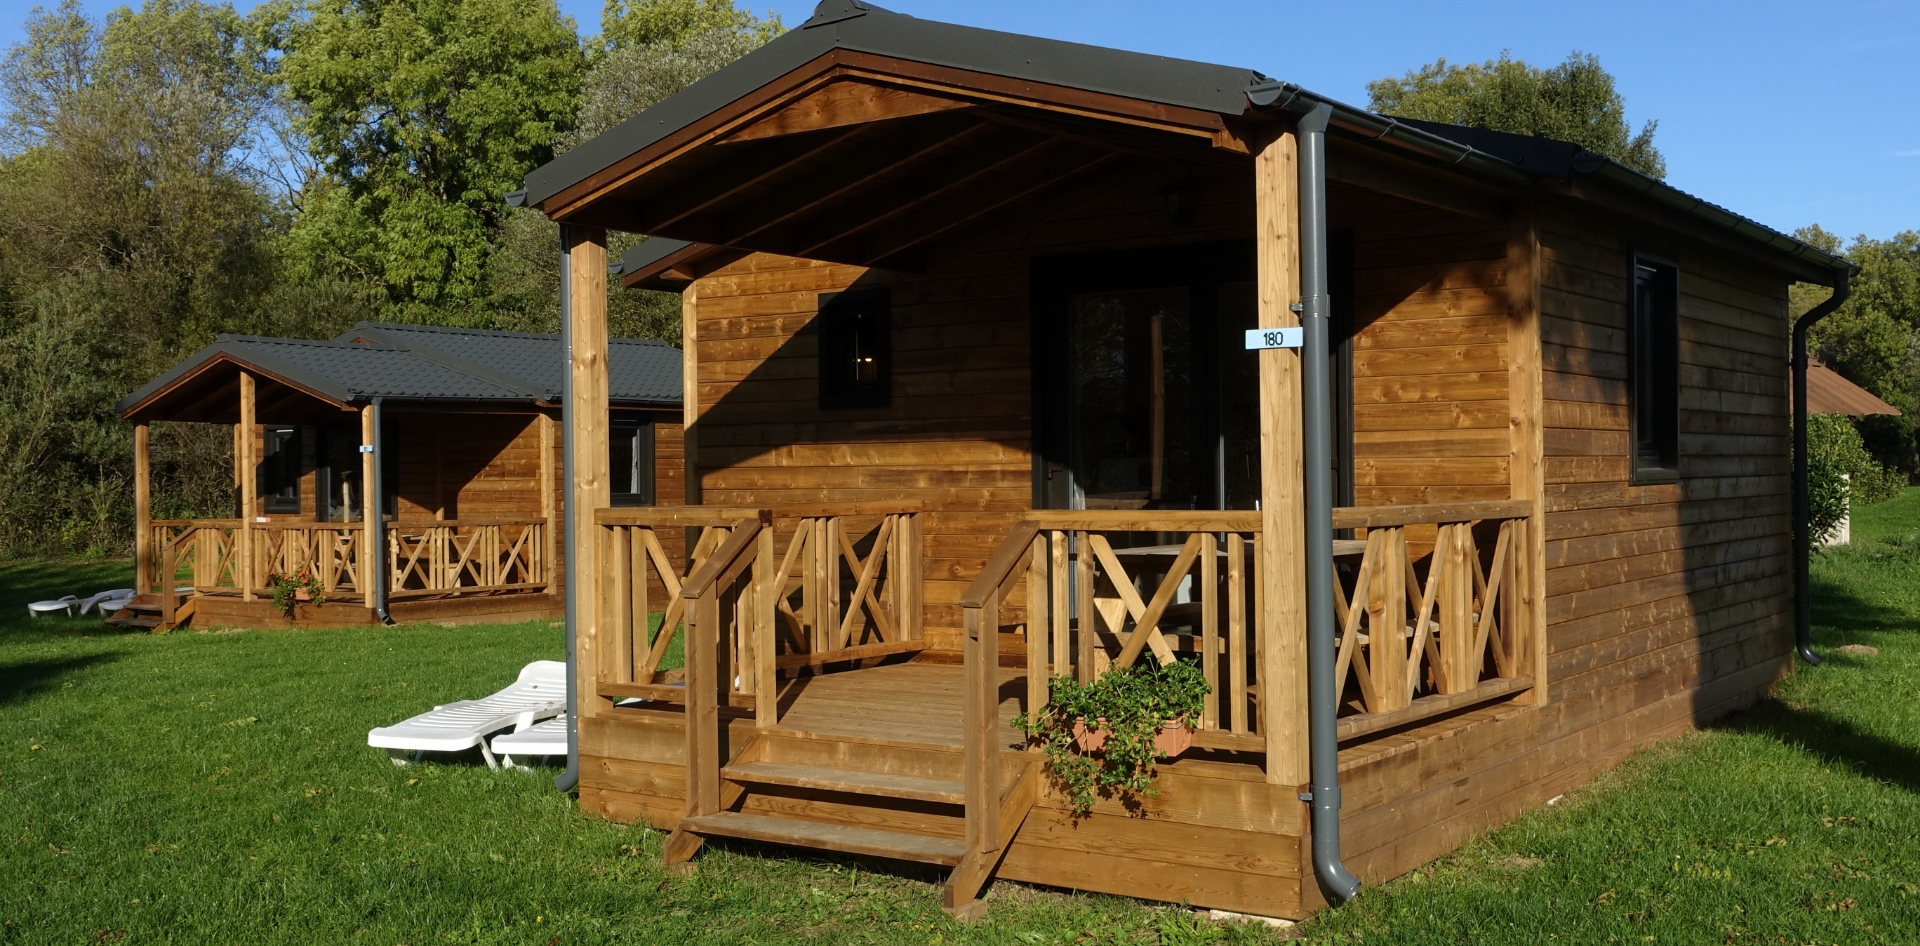 View of the Monia Chalet with covered wood terrace to rent at Les Bords de Loue campsite in Jura